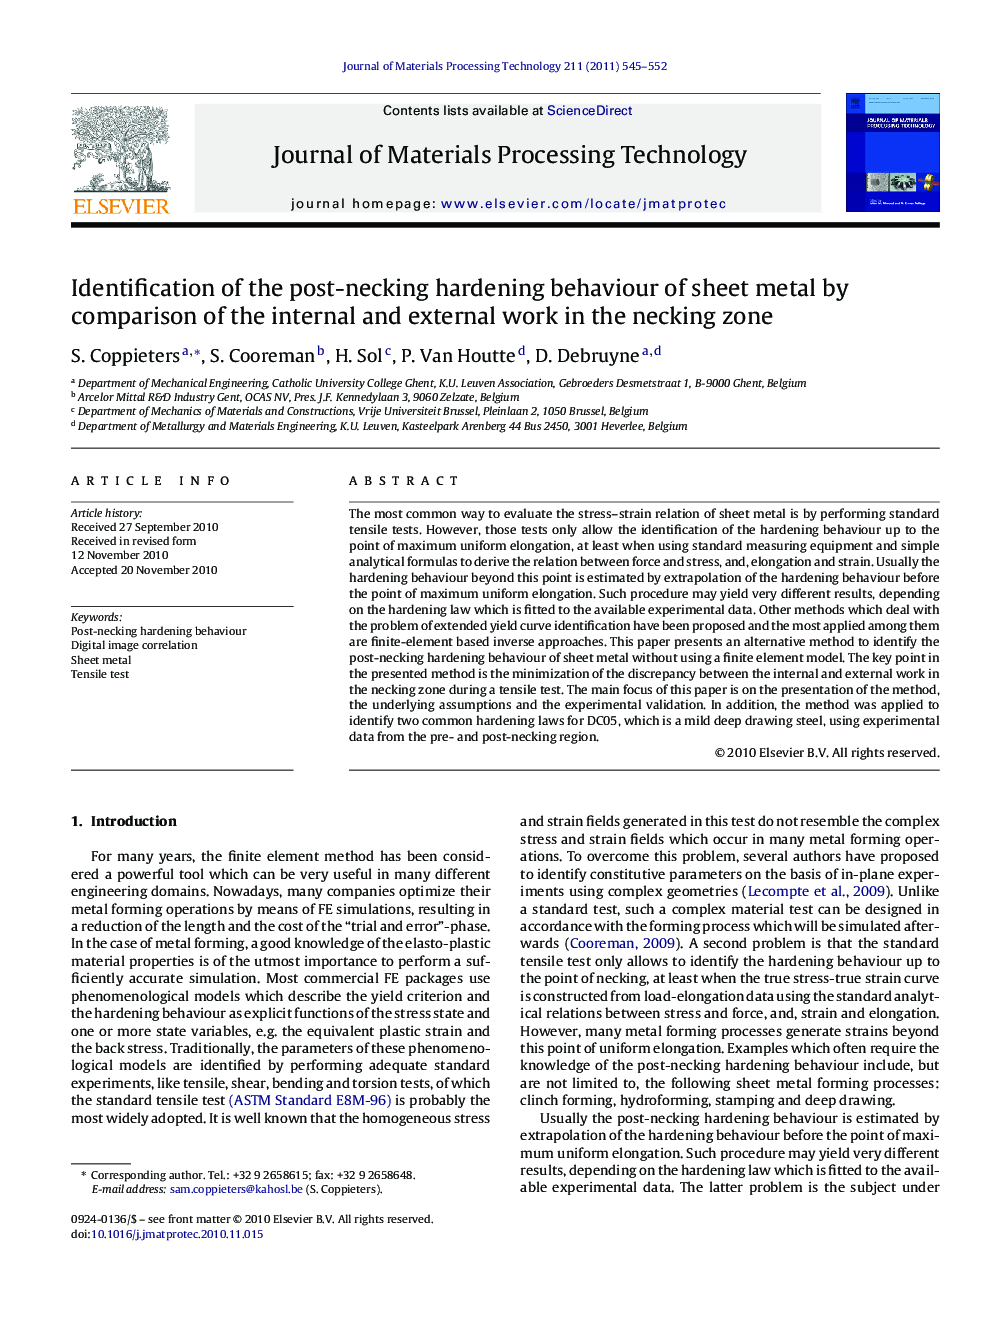 Identification of the post-necking hardening behaviour of sheet metal by comparison of the internal and external work in the necking zone